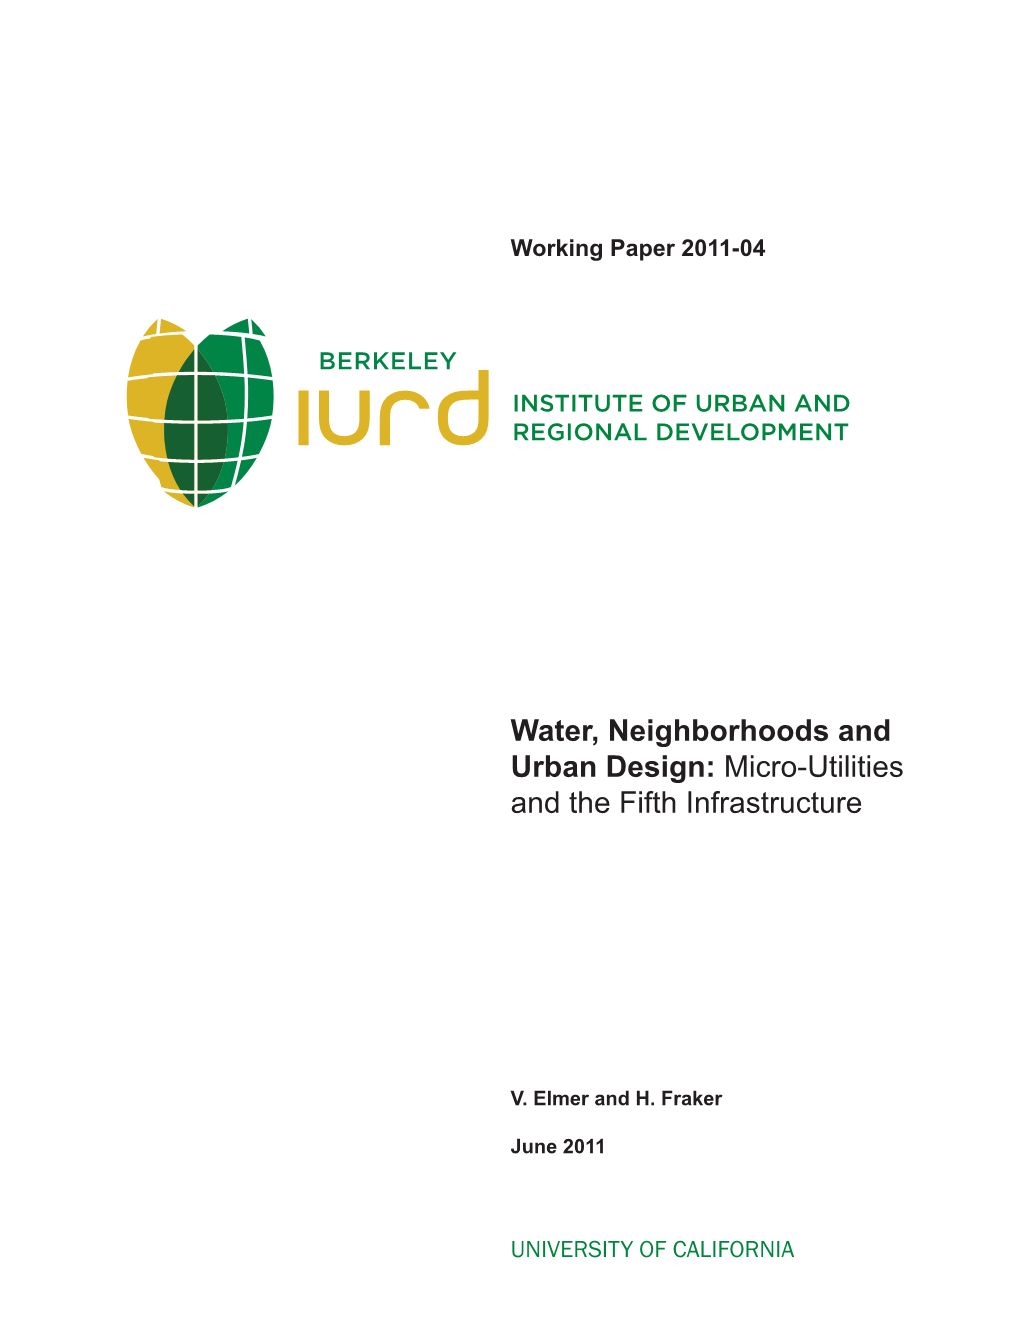 Water, Neighborhoods and Urban Design: Micro-Utilities and the Fifth Infrastructure